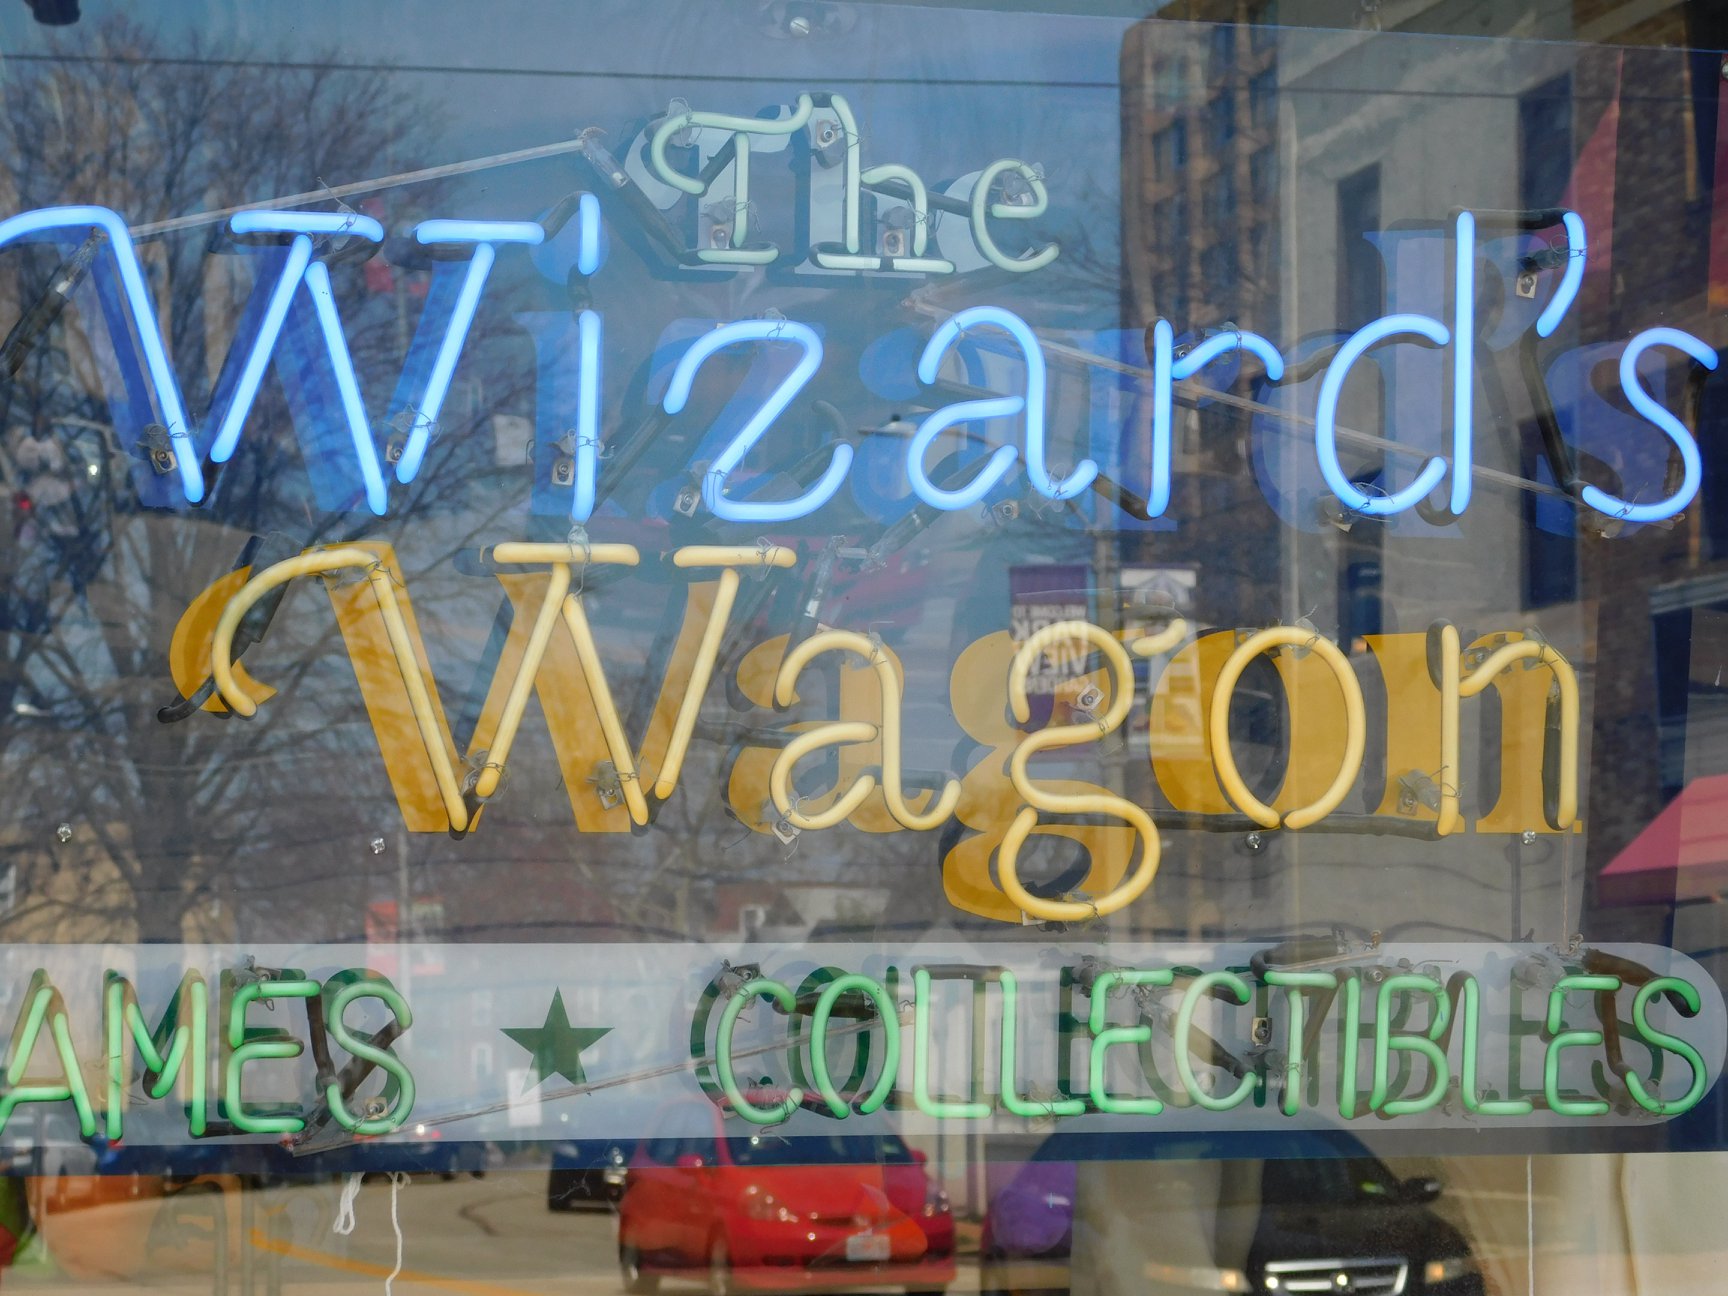 The Wizard's Wagon, nerd out in St. Louis.